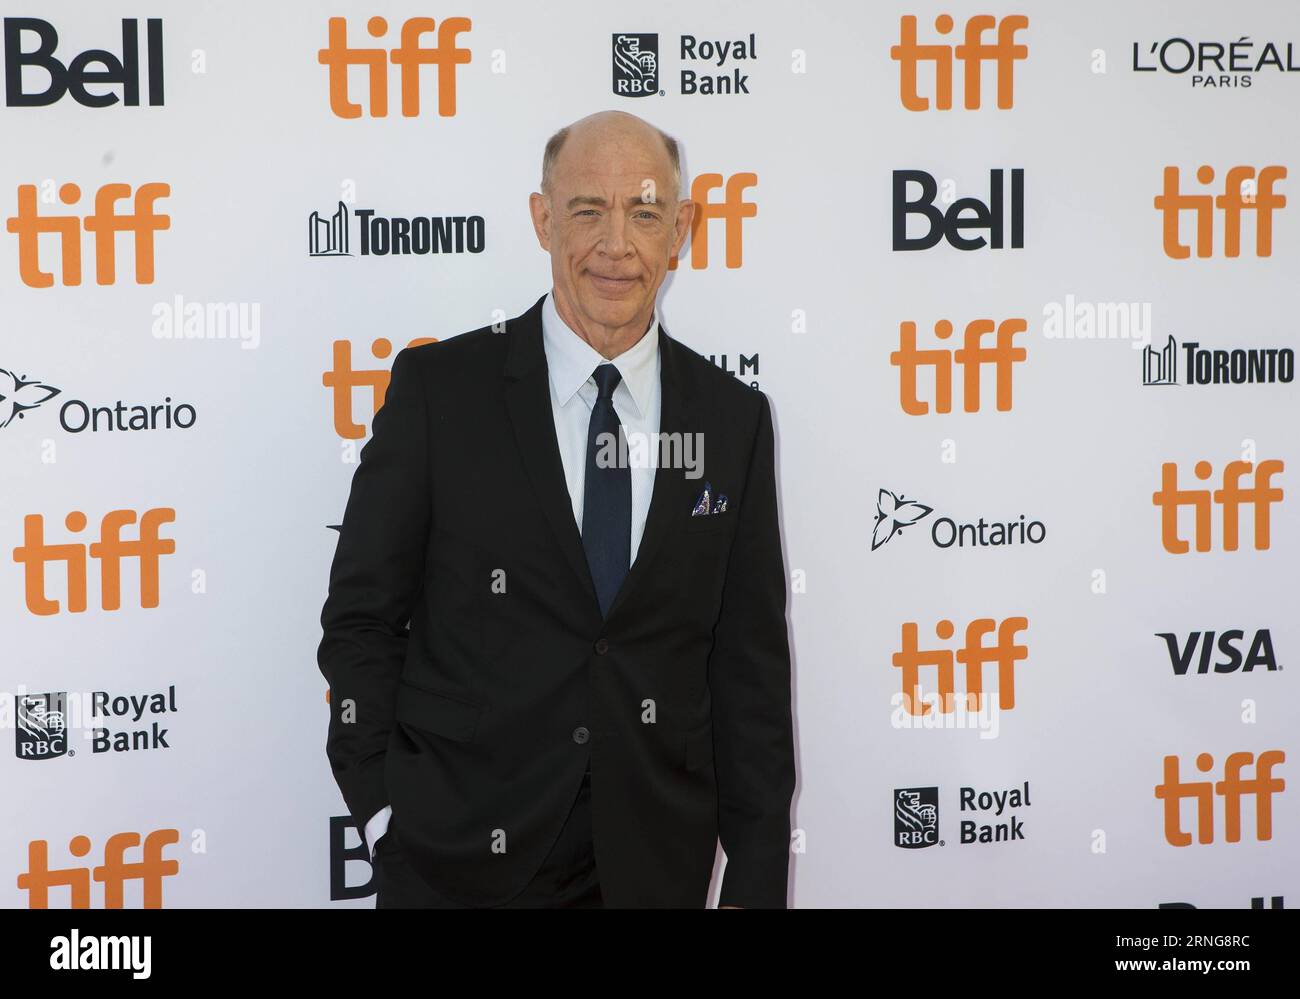 TORONTO, Sept. 12, 2016 -- Actor J. K. Simmons poses for photos before the Canadian premiere of the film La La Land at the Princess of Wales Theater during the 41st Toronto International Film Festival in Toronto, Canada, Sept. 12, 2016. ) (zjy) CANADA-TORONTO-FILM FESTIVAL- LA LA LAND ZouxZheng PUBLICATIONxNOTxINxCHN   Toronto Sept 12 2016 Actor J K Simmons Poses for Photos Before The Canadian Premiere of The Film La La Country AT The Princess of Wales Theatre during The 41st Toronto International Film Festival in Toronto Canada Sept 12 2016 zjy Canada Toronto Film Festival La La Country ZouxZ Stock Photo